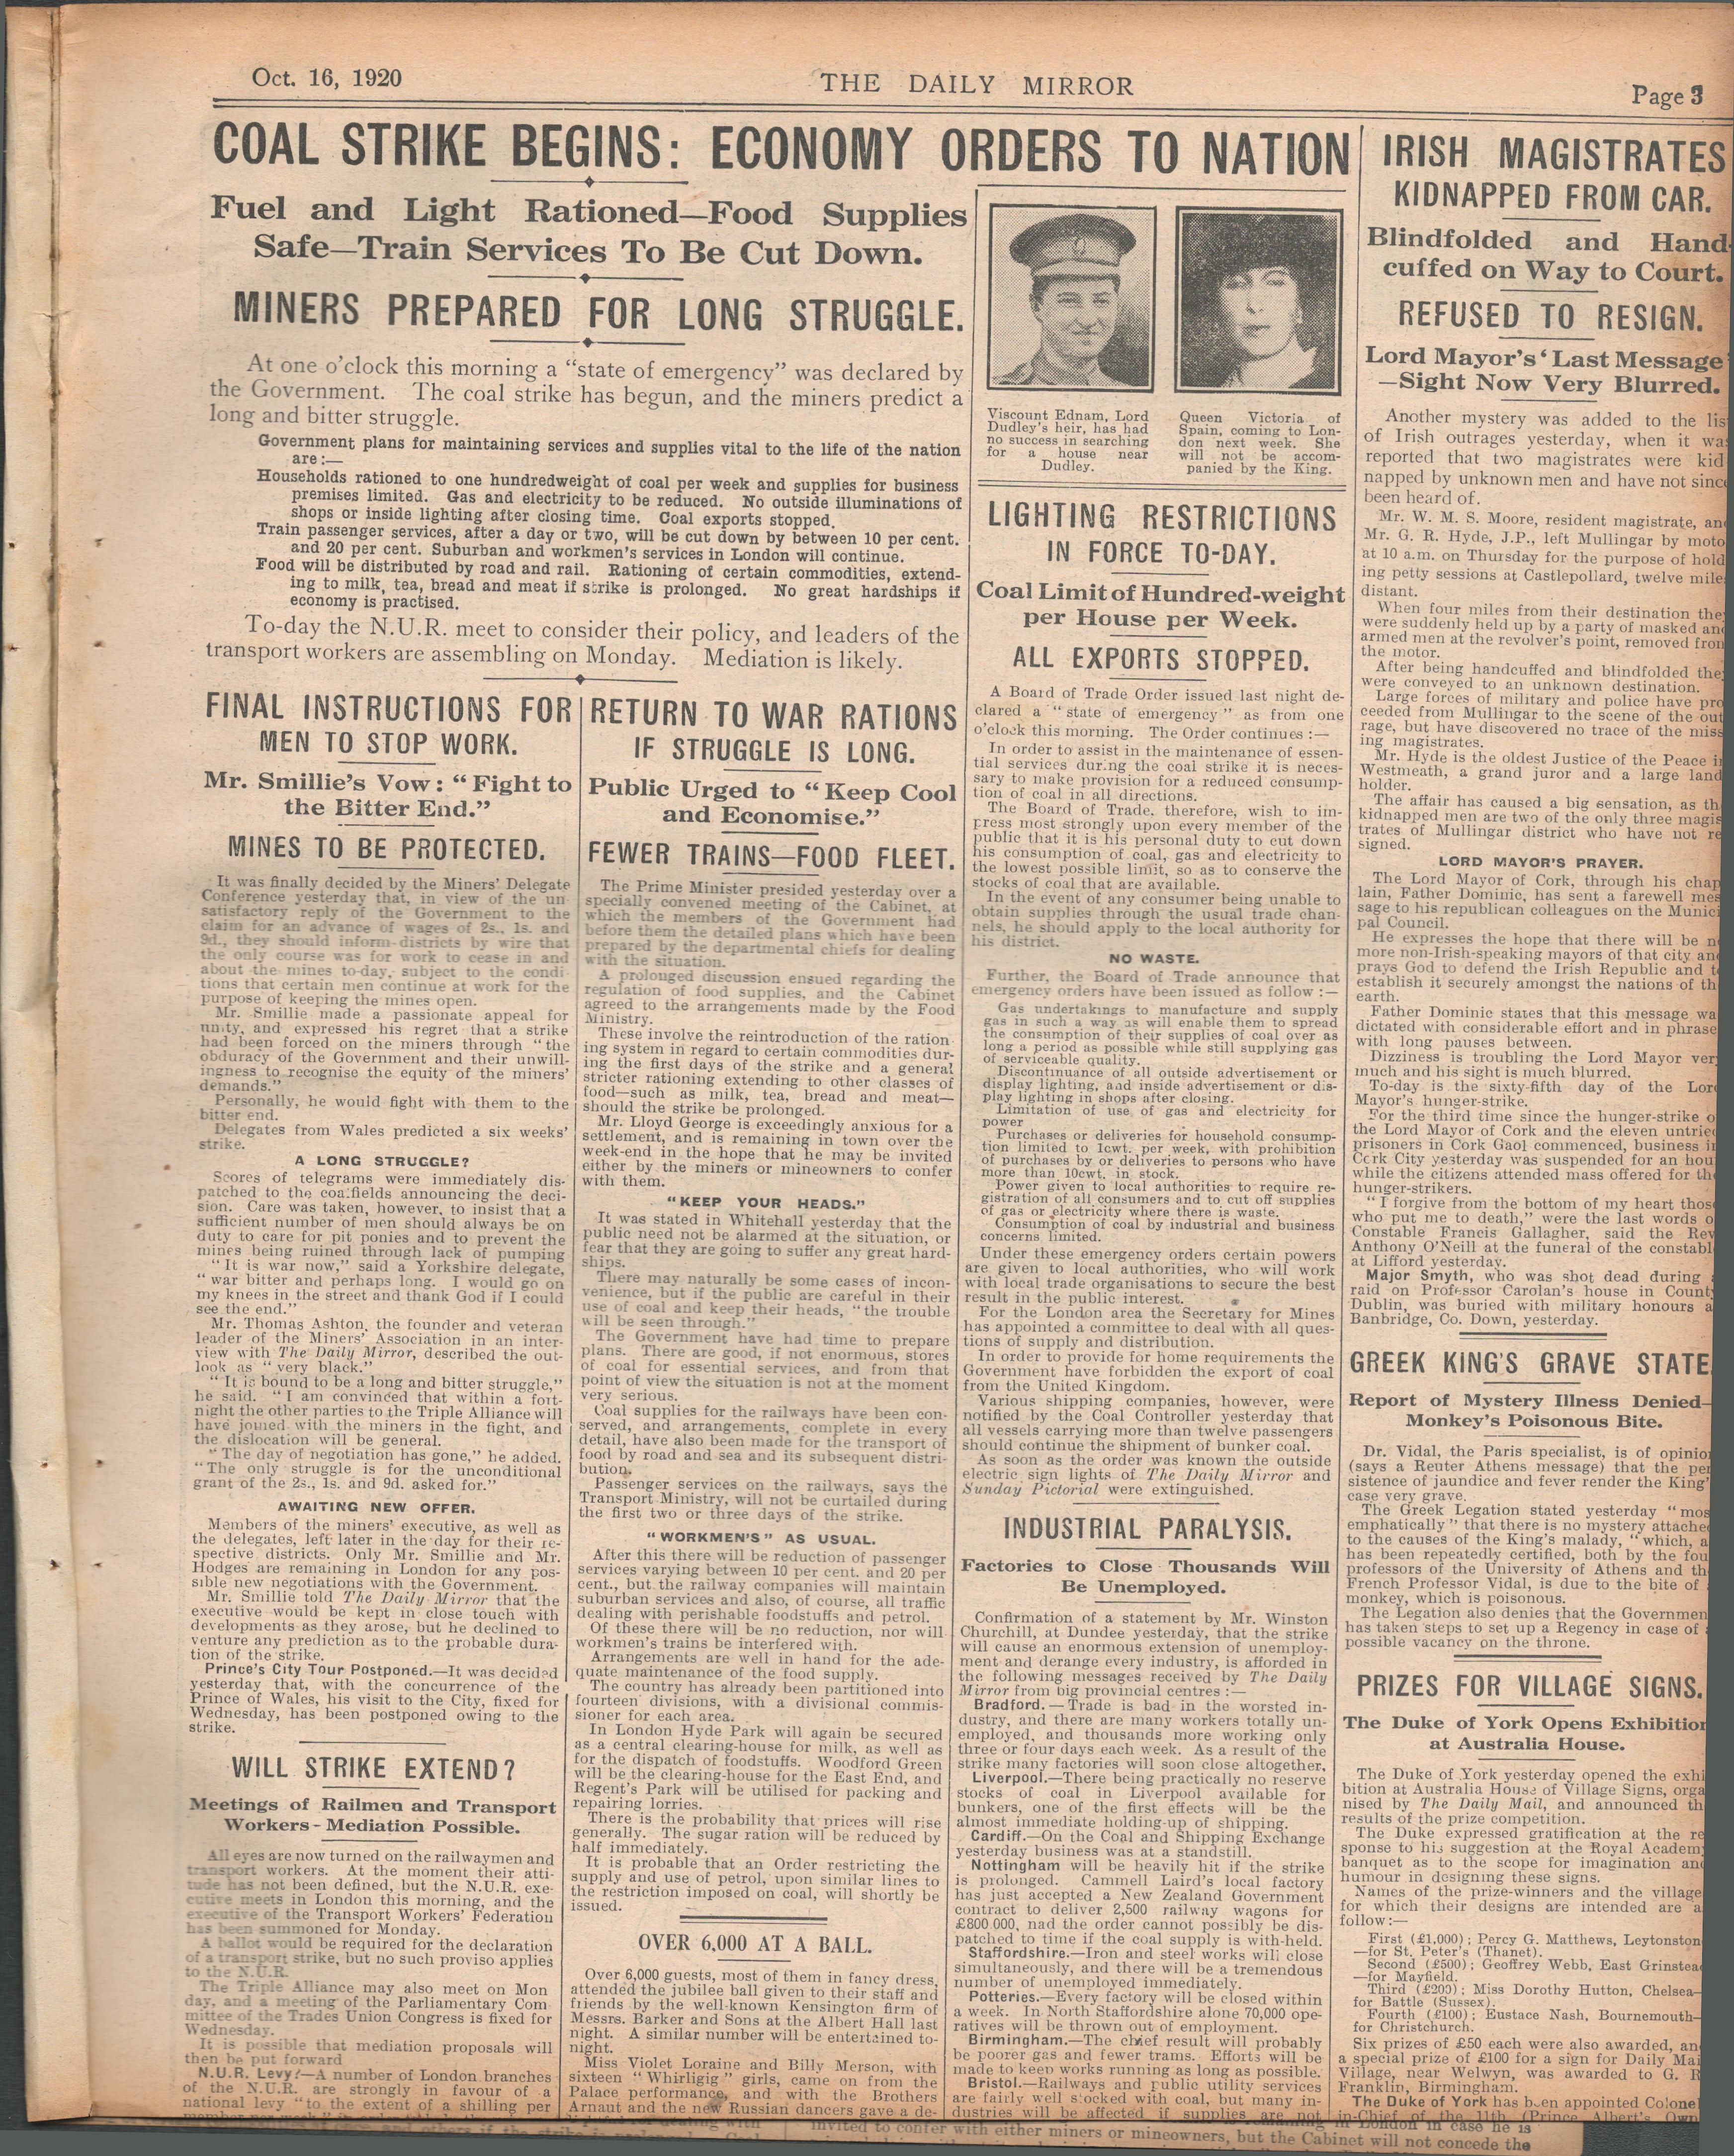 Set Of 3 Original Newspapers Each With The Irish War Of Independence News Reports (3) - Image 3 of 3